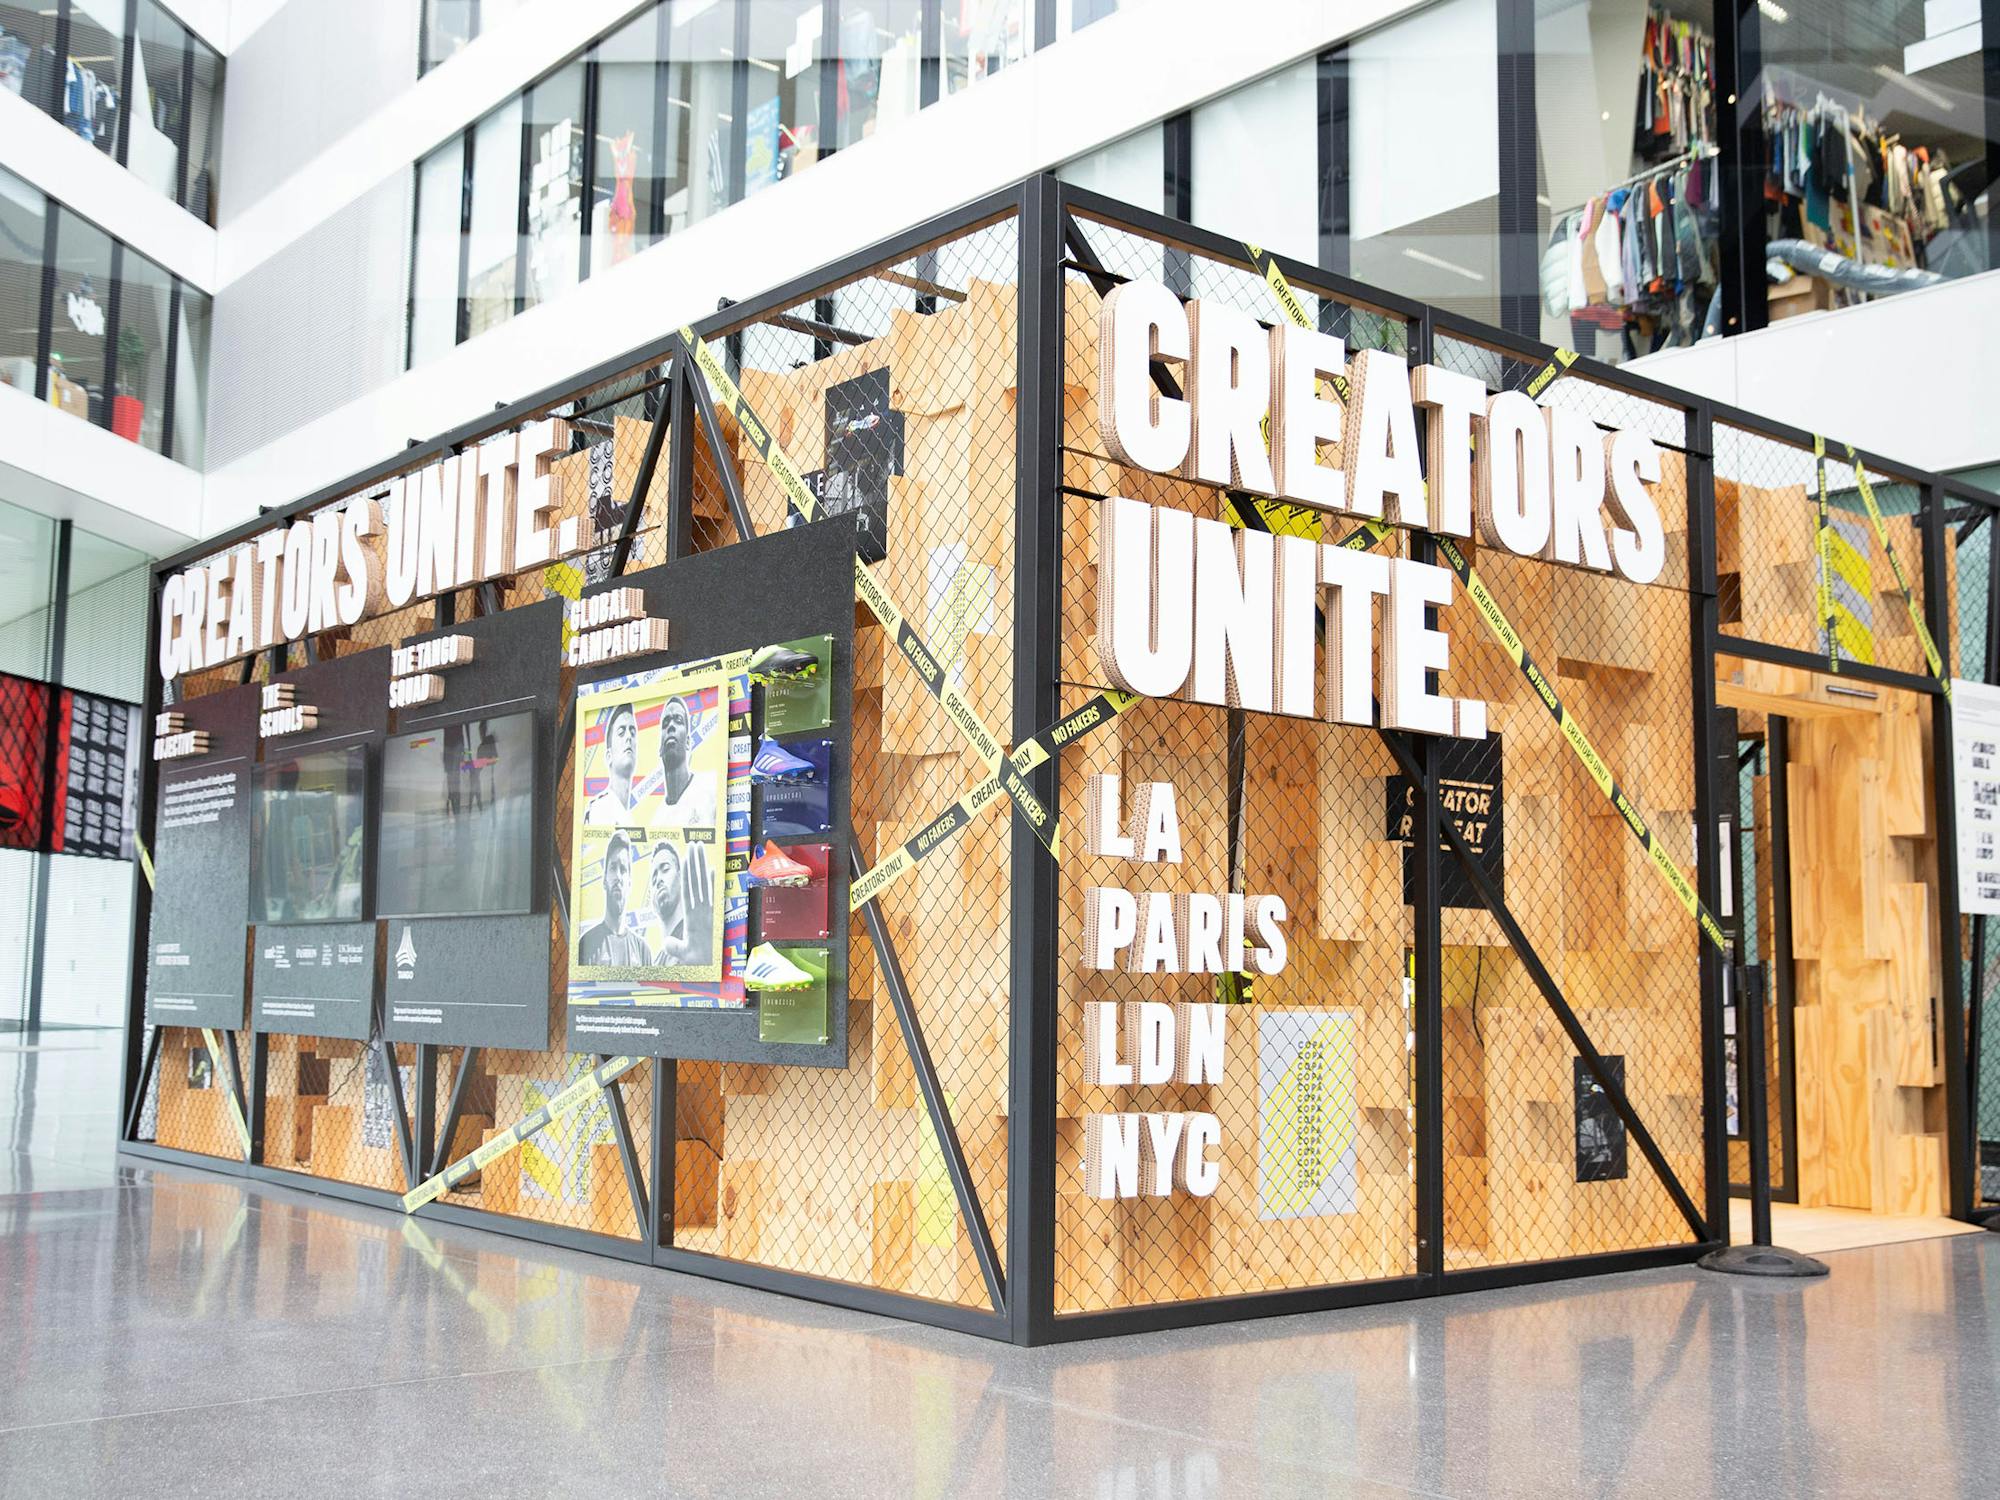 Indoor installation made of wood and steel with sign Creators Unite.